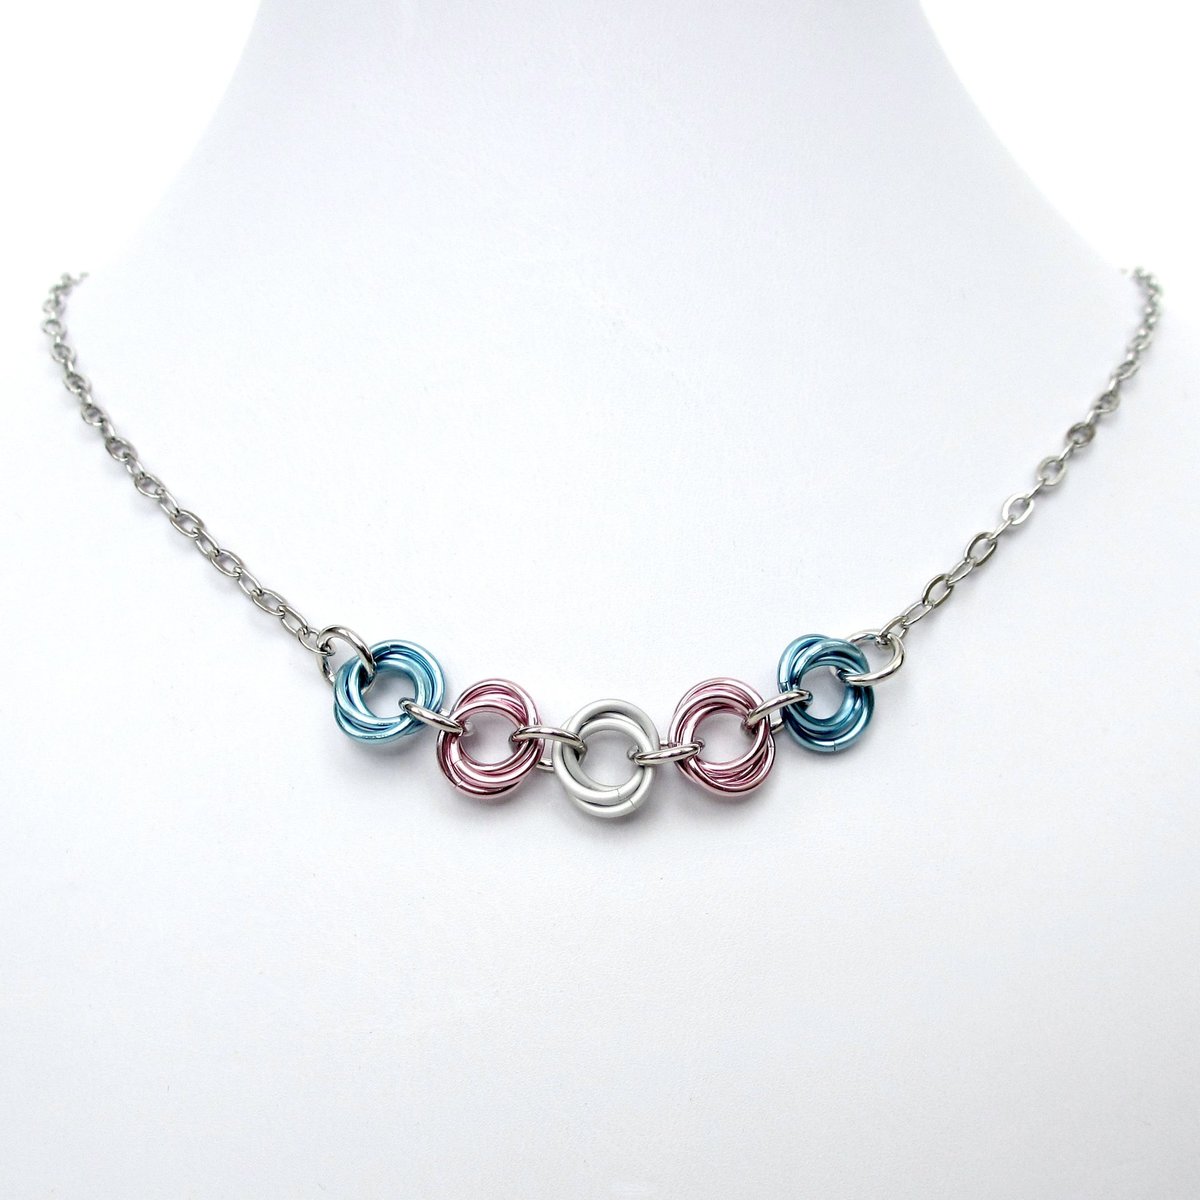 Transgender pride necklace, LGBTQ jewelry, chainmail trans pride love knot necklace